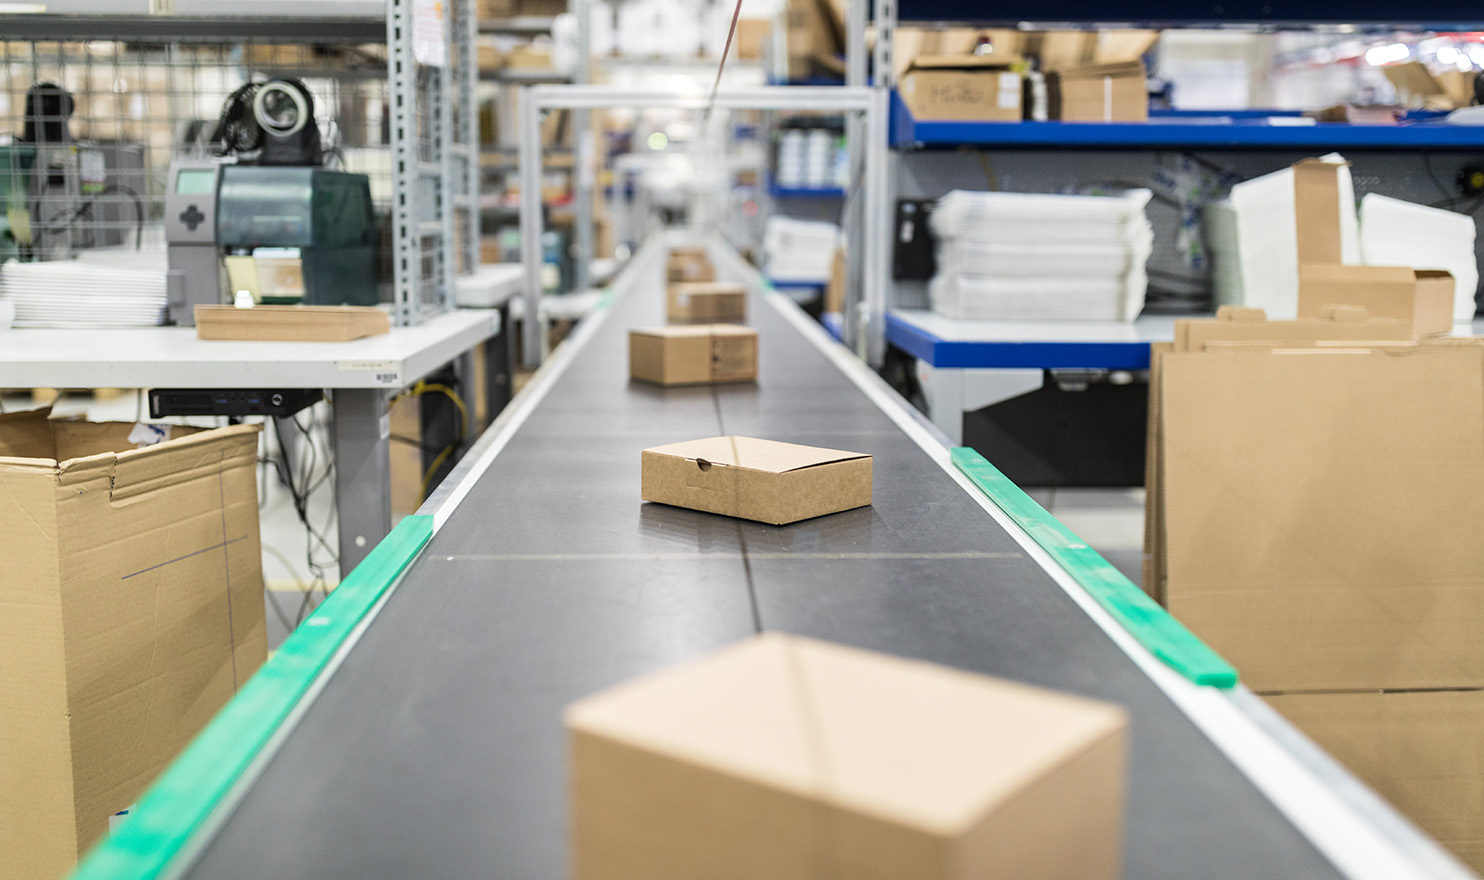 Boxes on a production line move through a warehouse using product liability insurance to insure the products they ship.